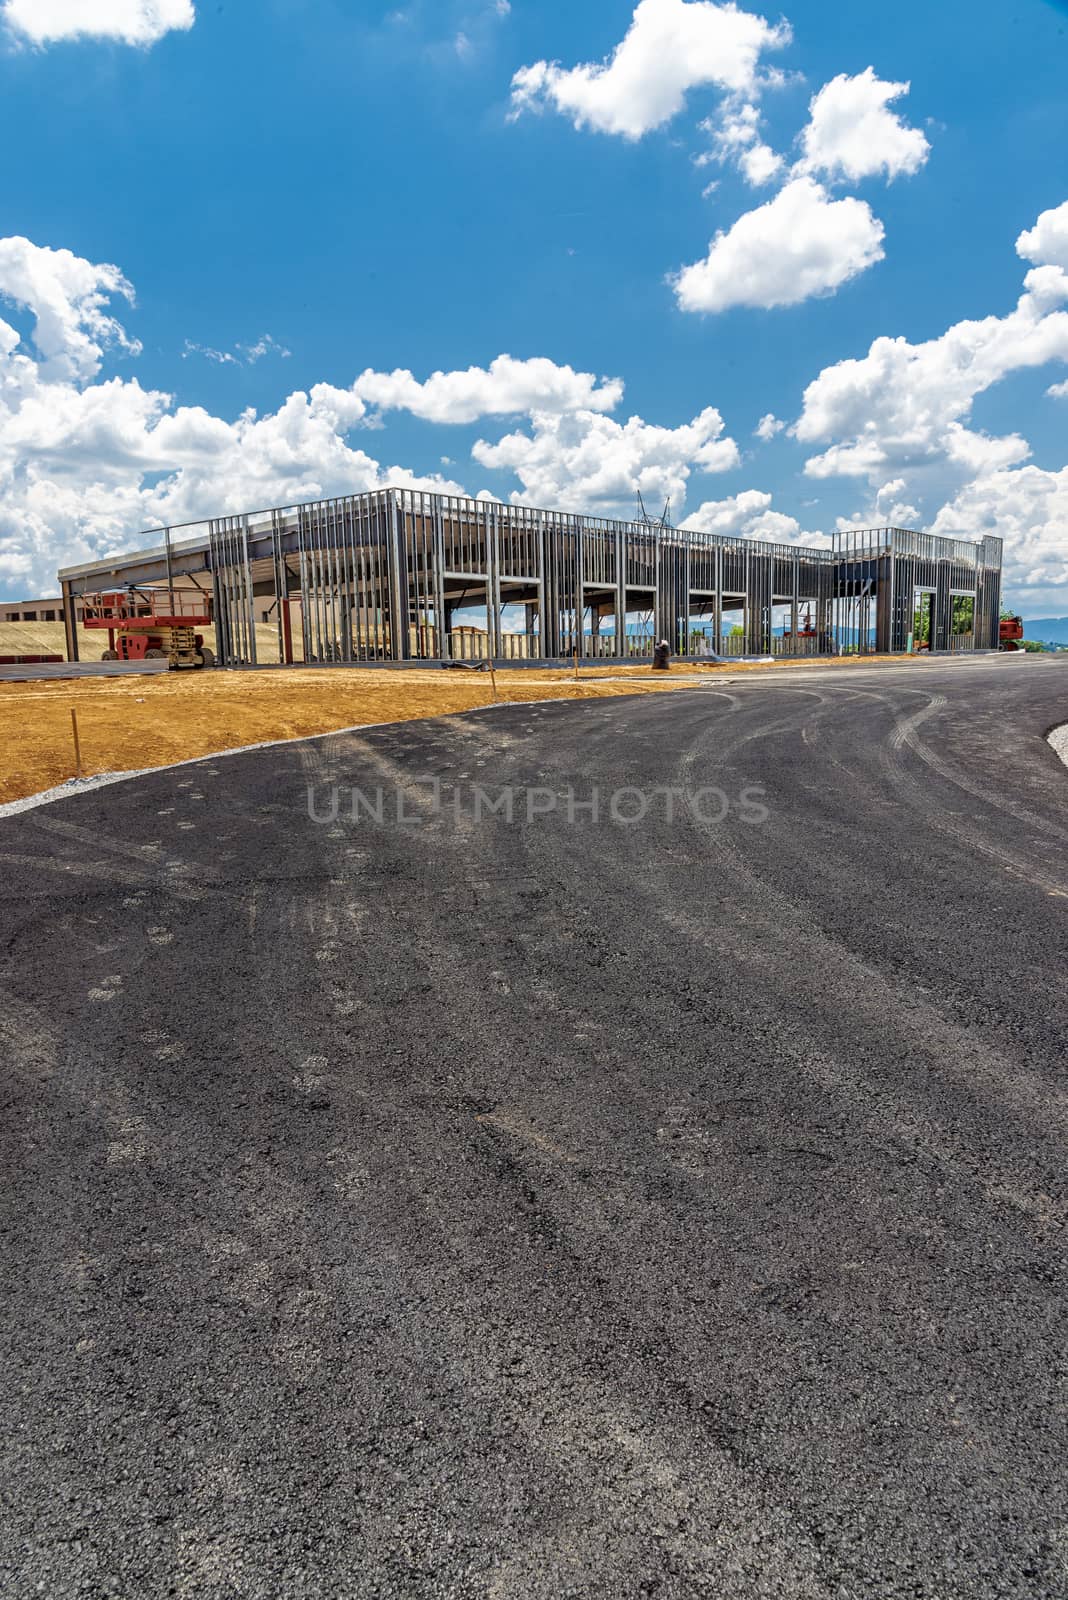 New Blacktop Leading To Commercial Construction Site by stockbuster1